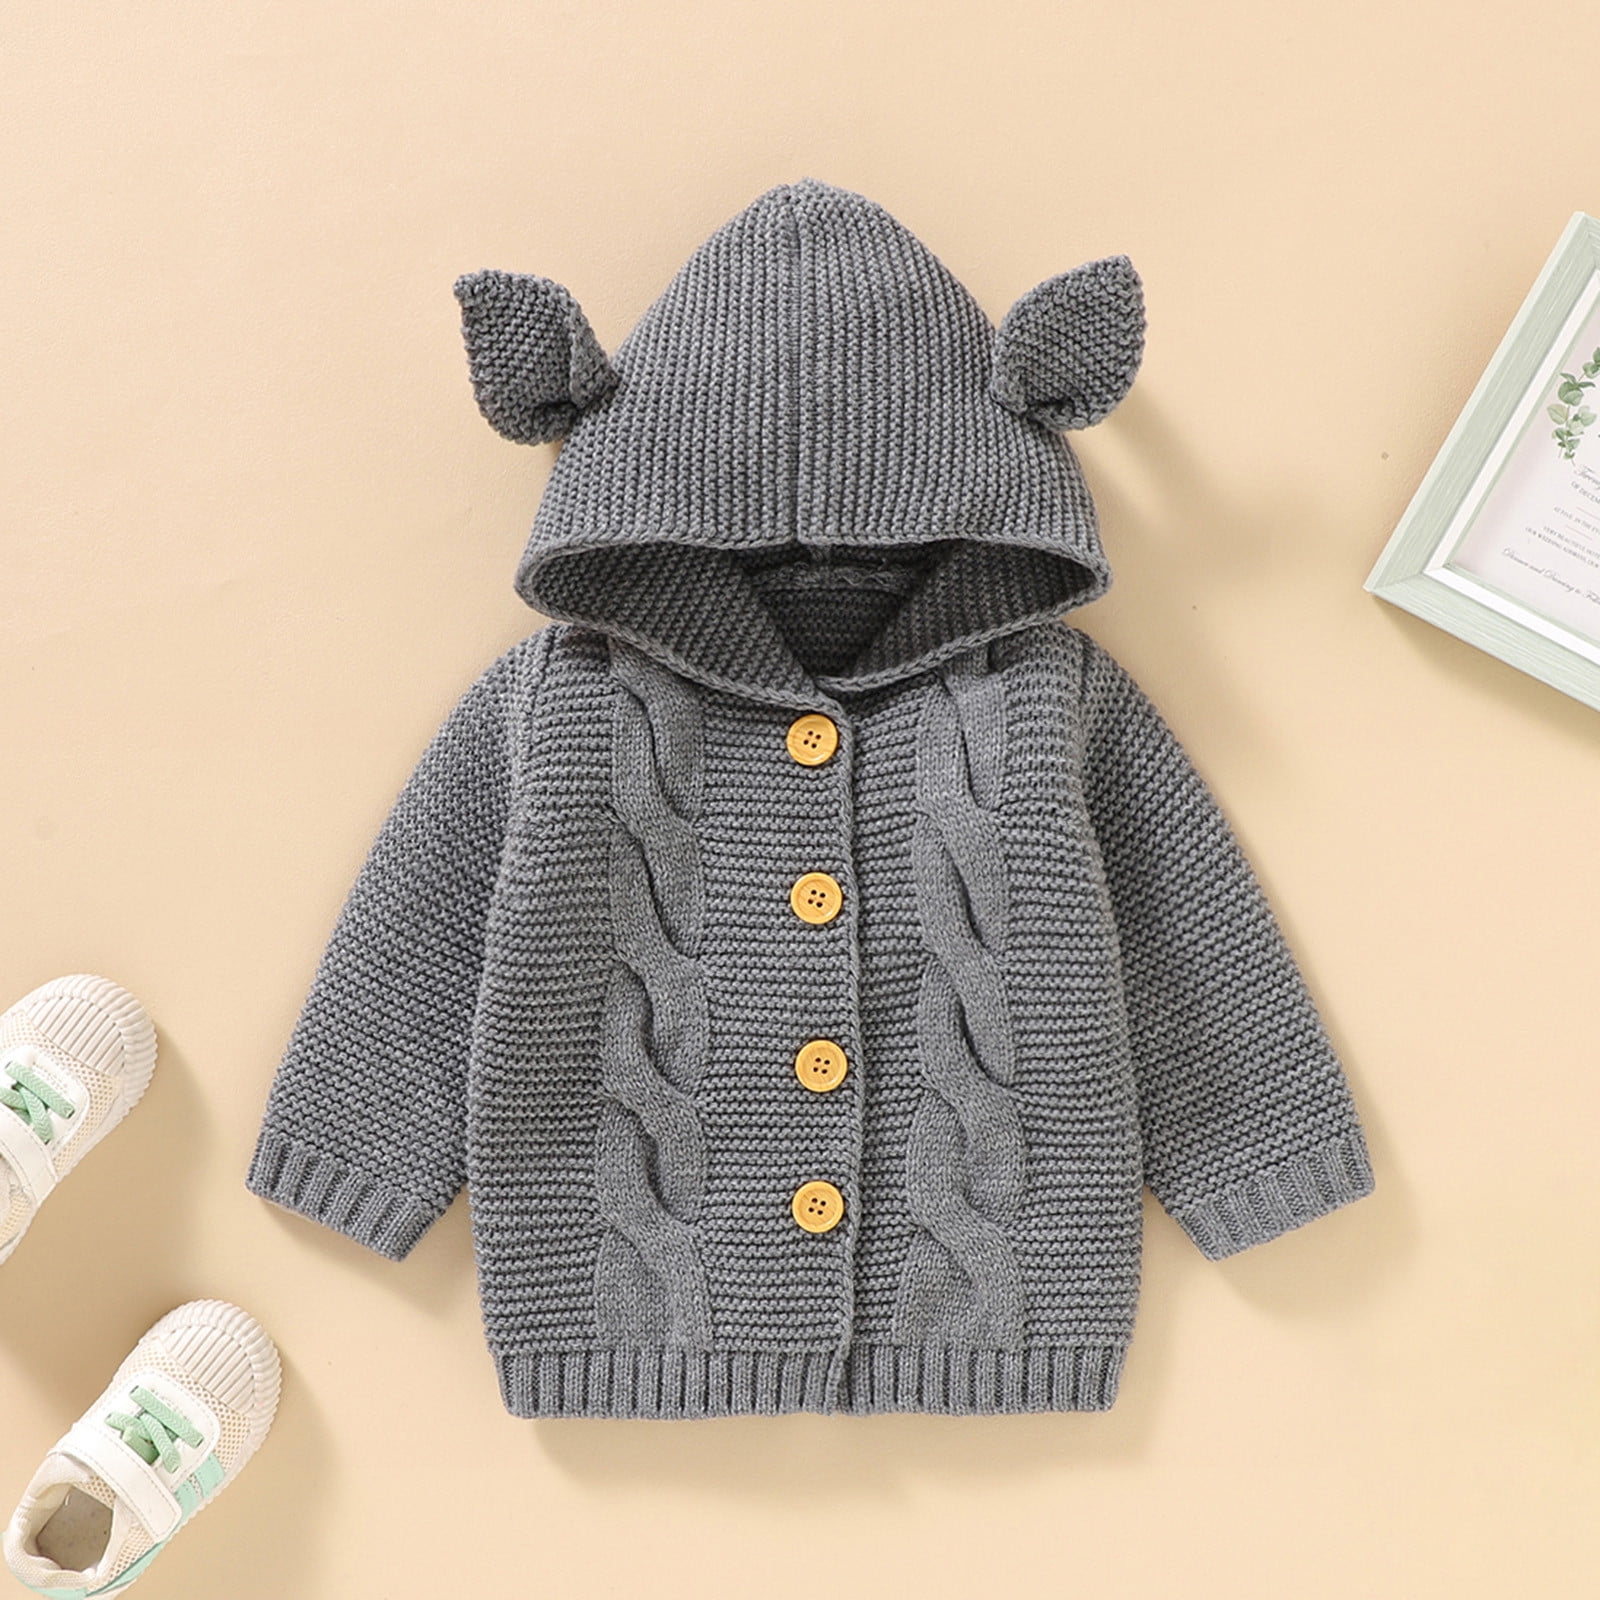 Buy Online Baby Boy Clothes to Dress a Little Man in Stylish